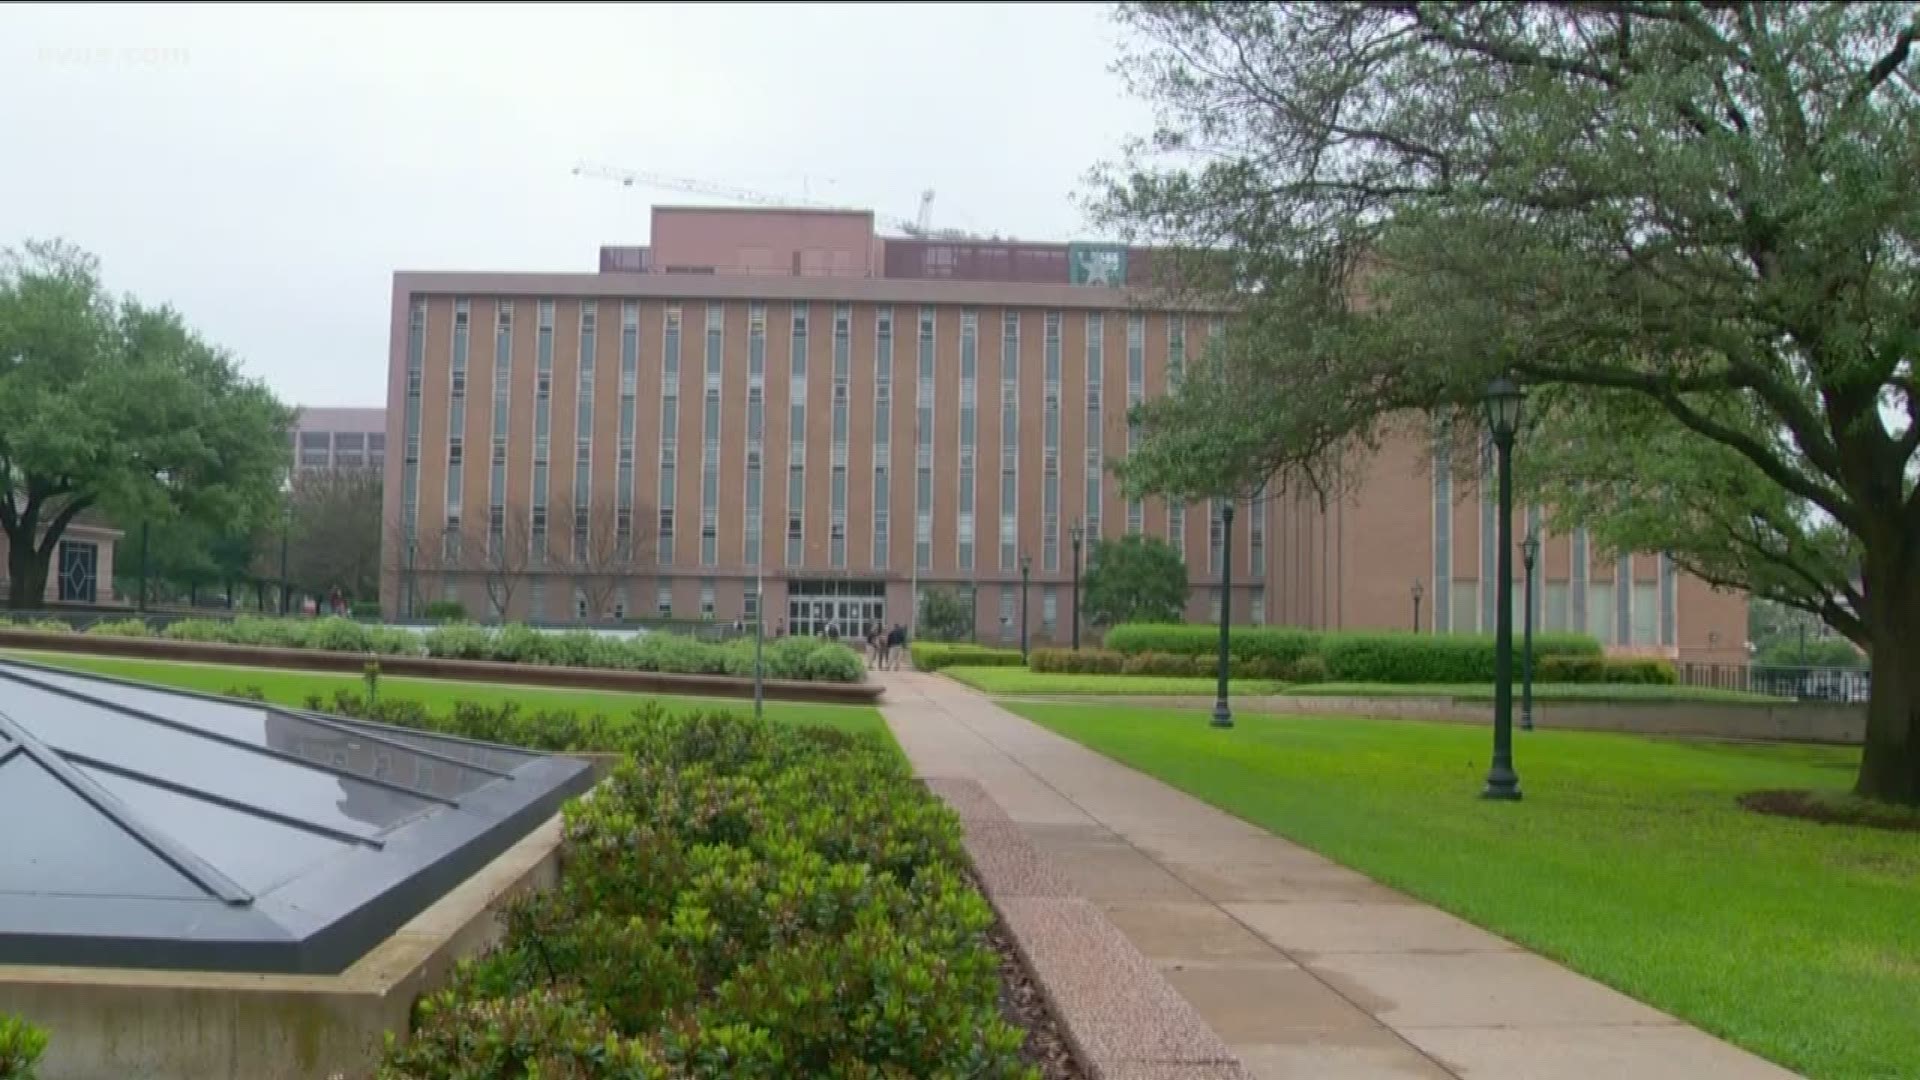 The Texas Rangers are investigating the death of a man whose body was found on the Texas Capitol grounds.